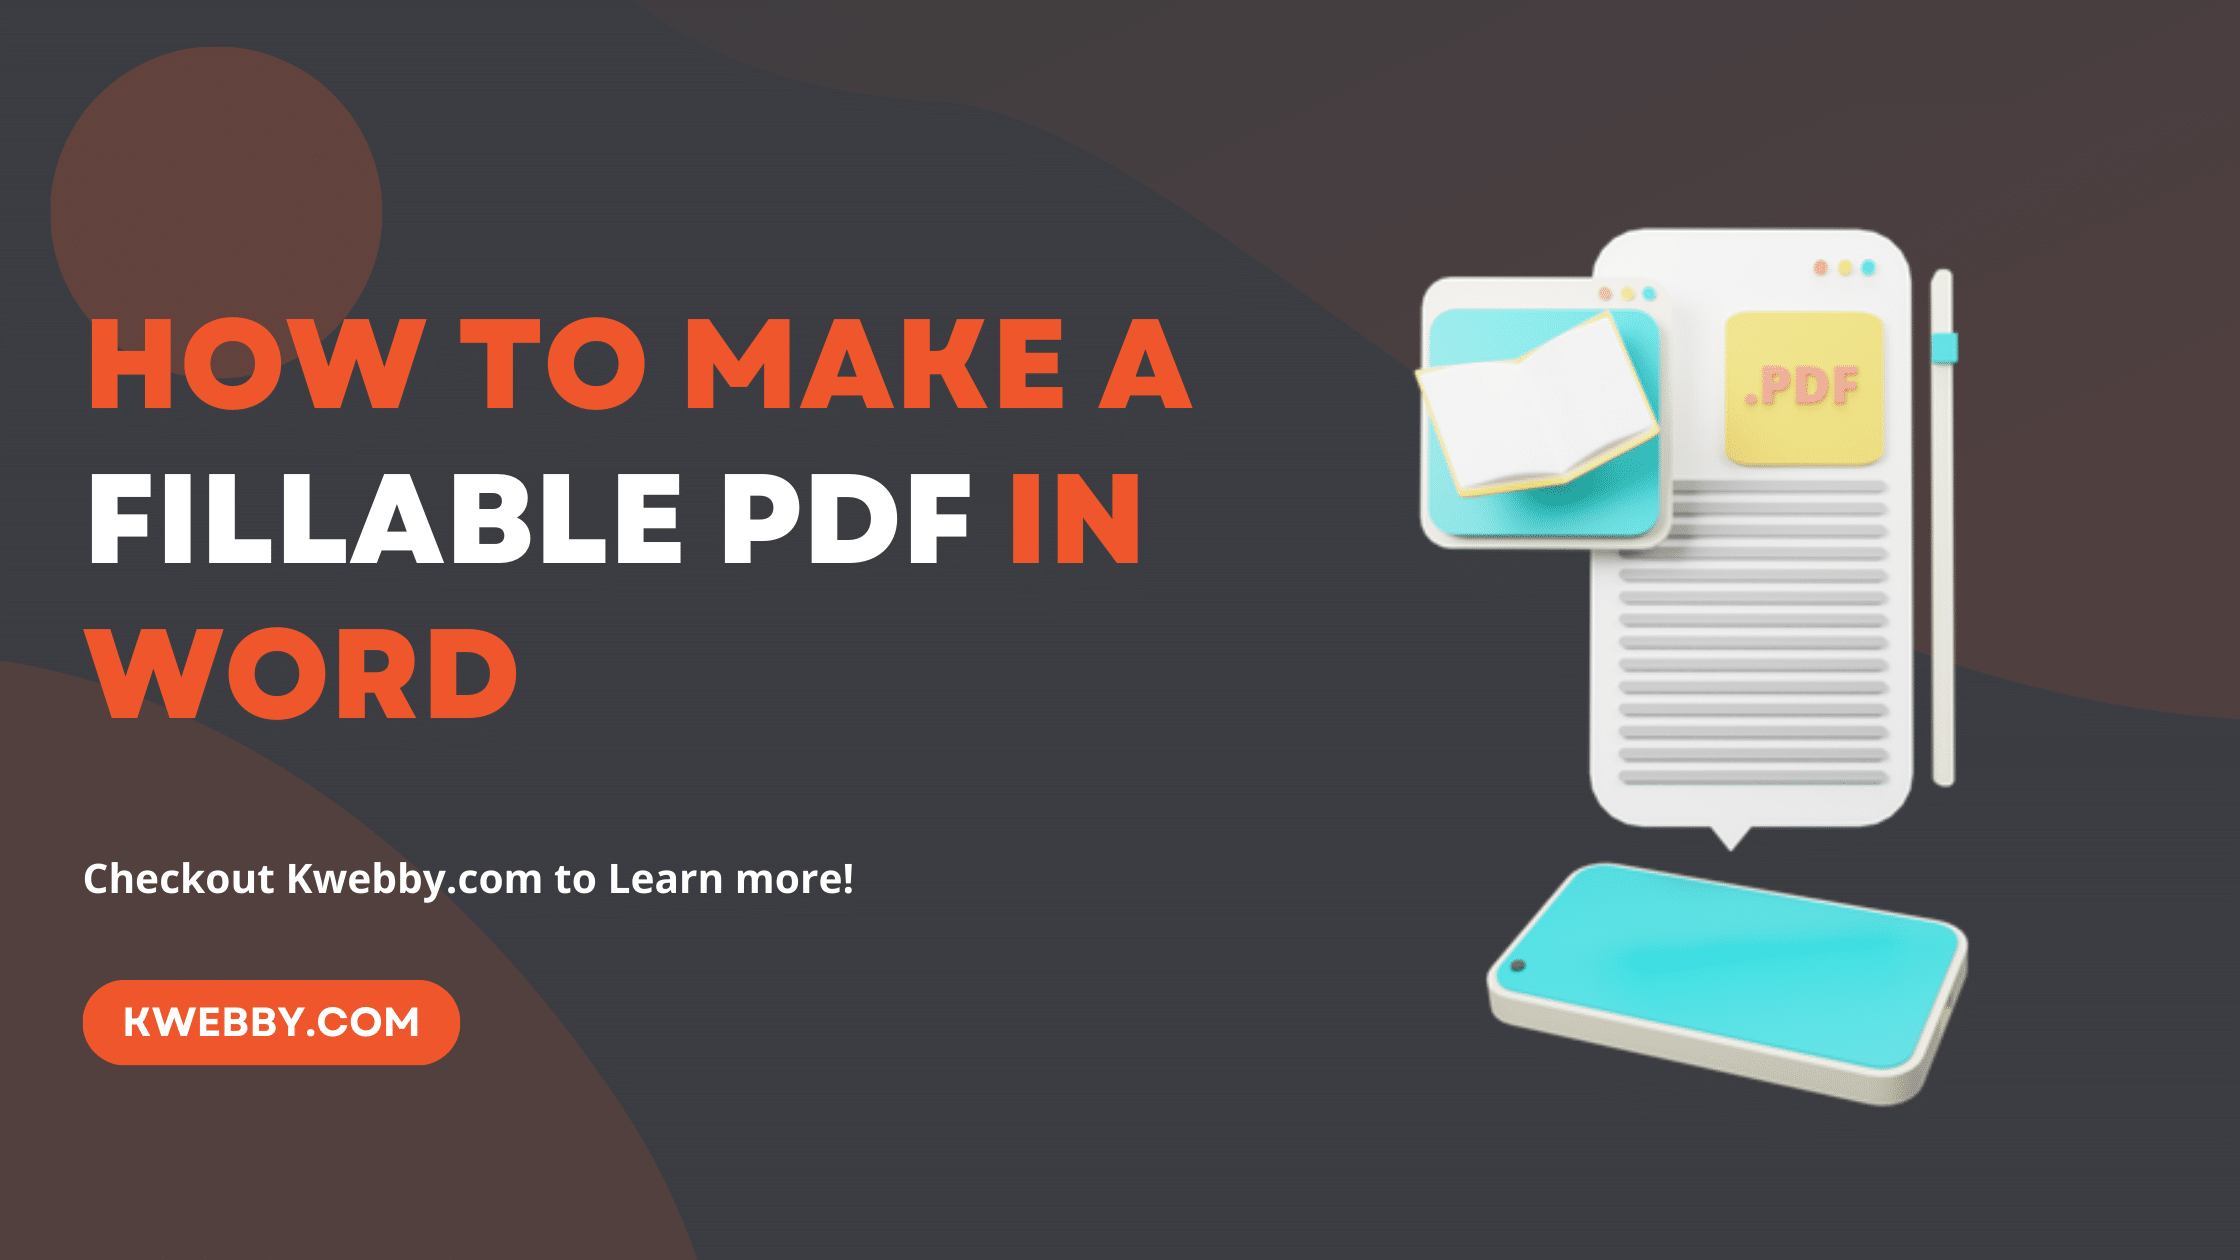 How to Make a Fillable PDF in Word in Few Steps